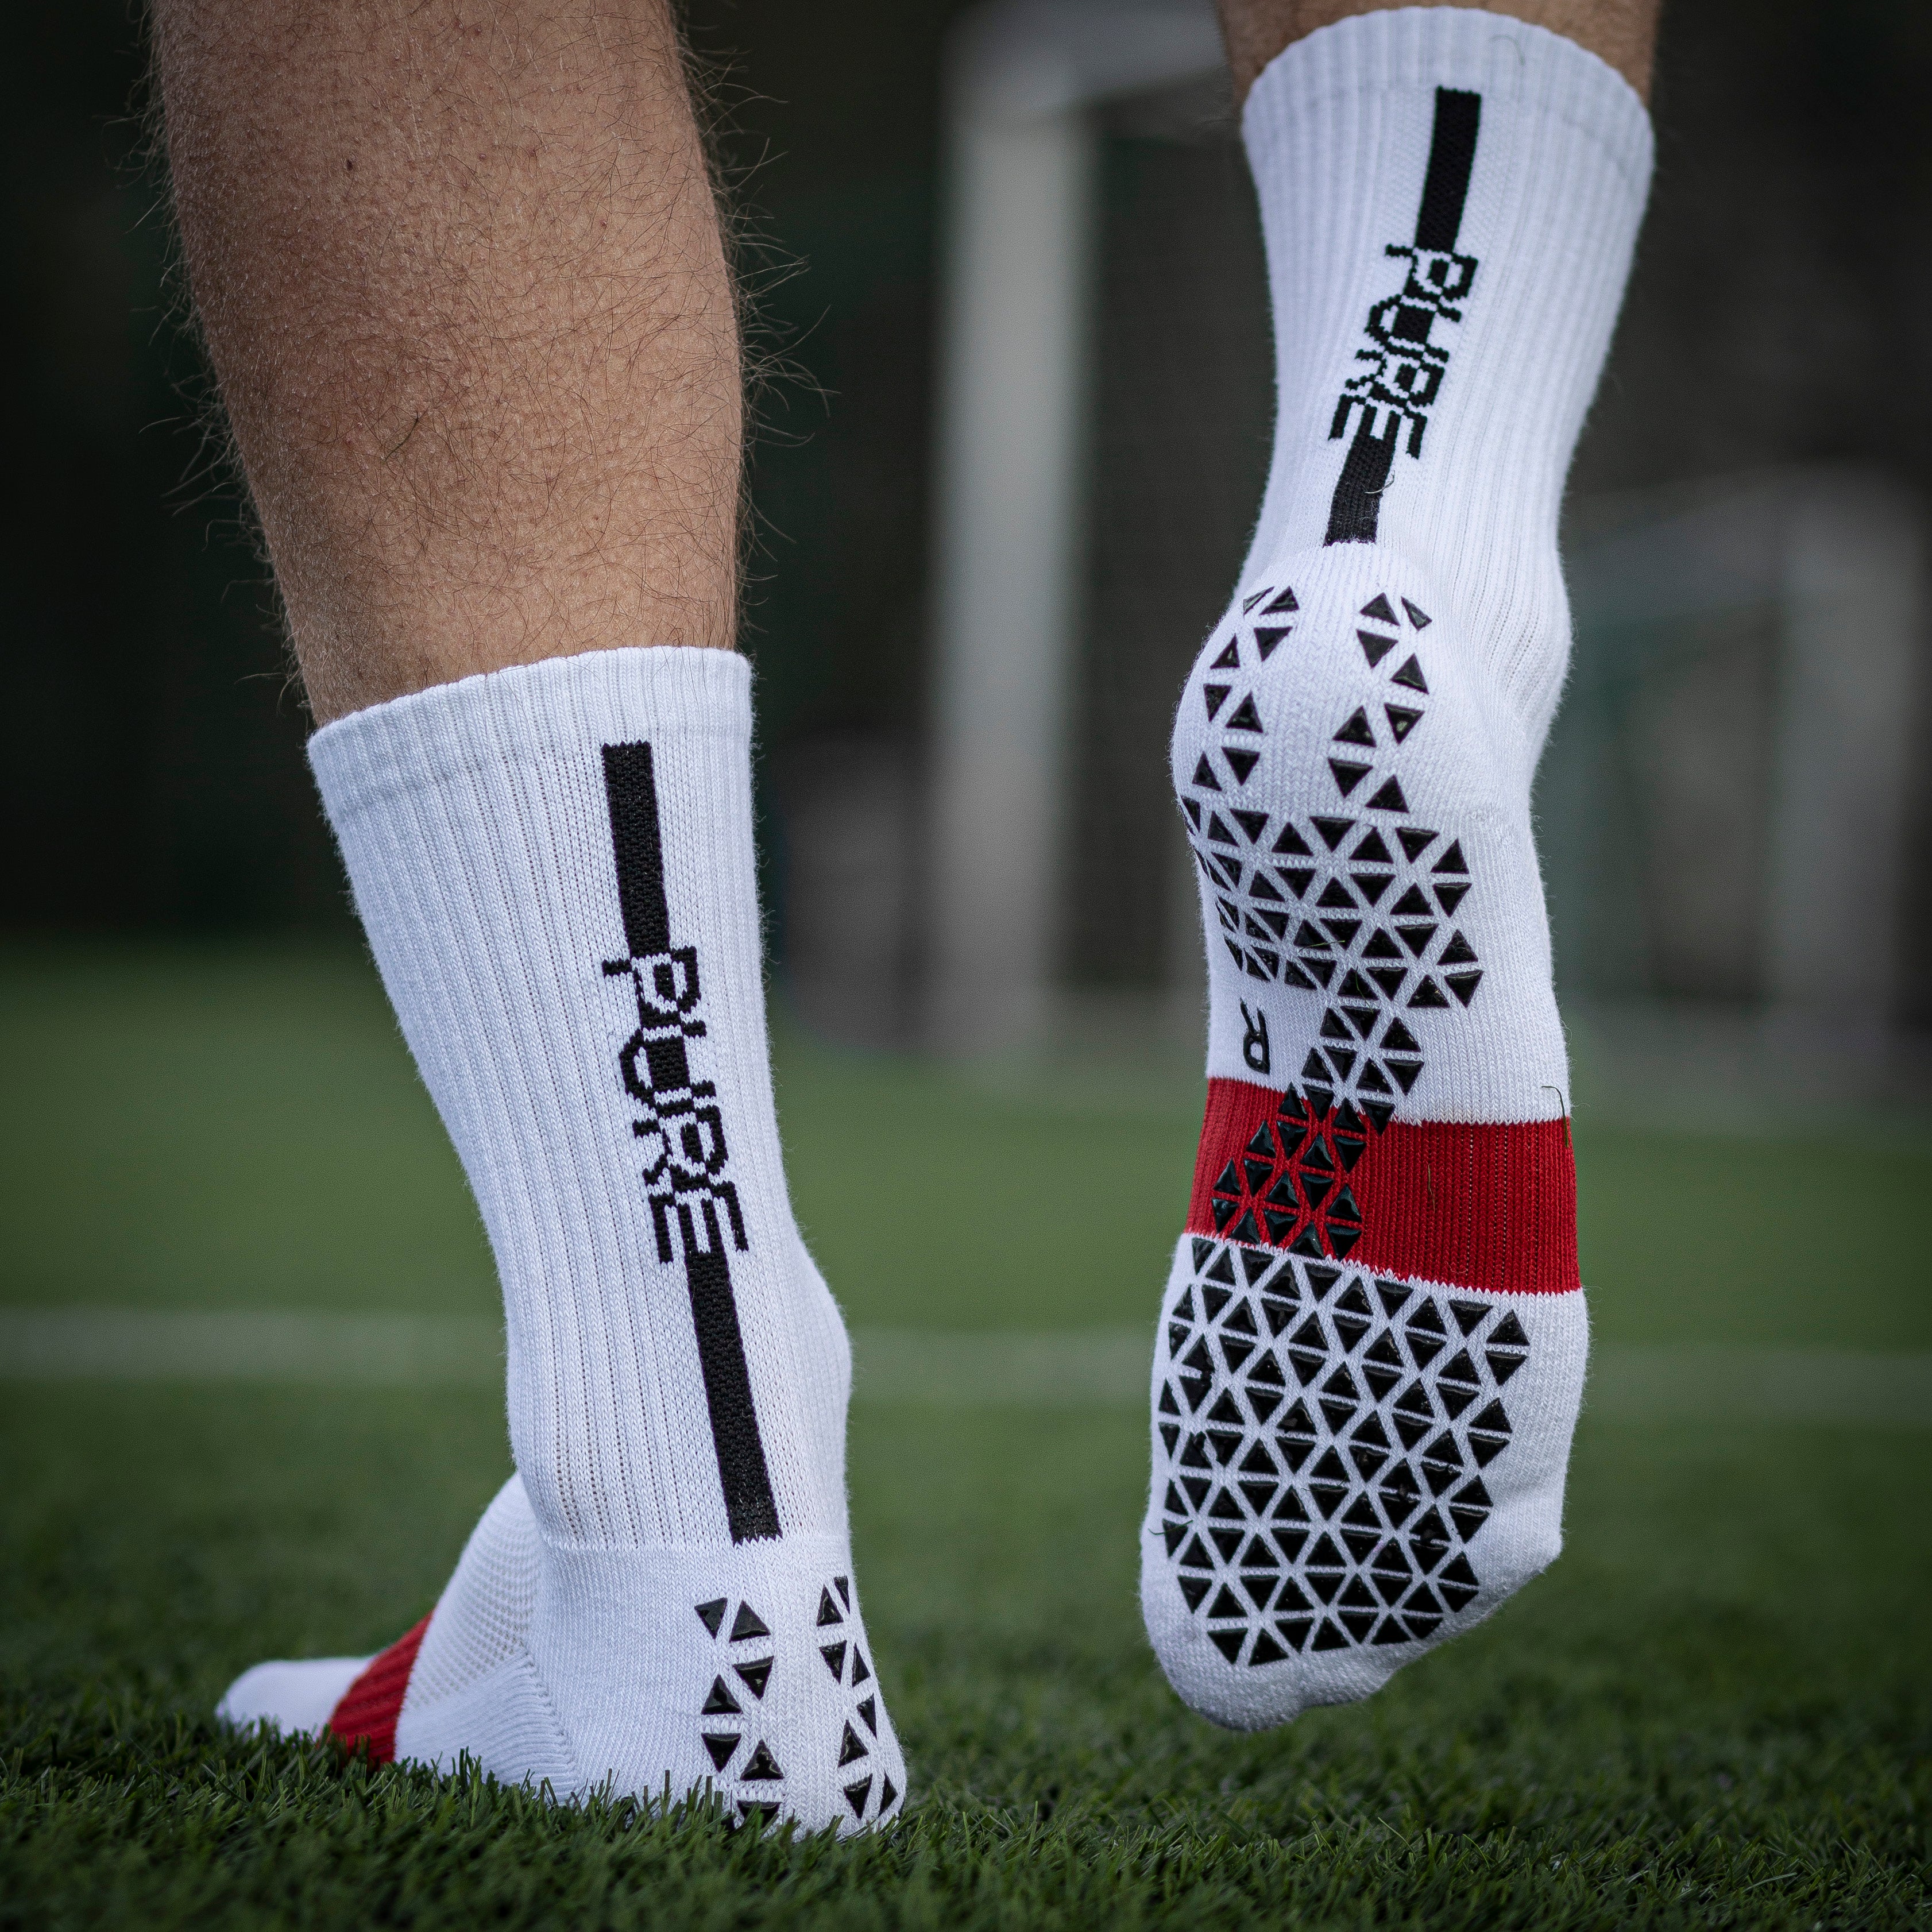 Pure Grip Socks Review & Special Offer